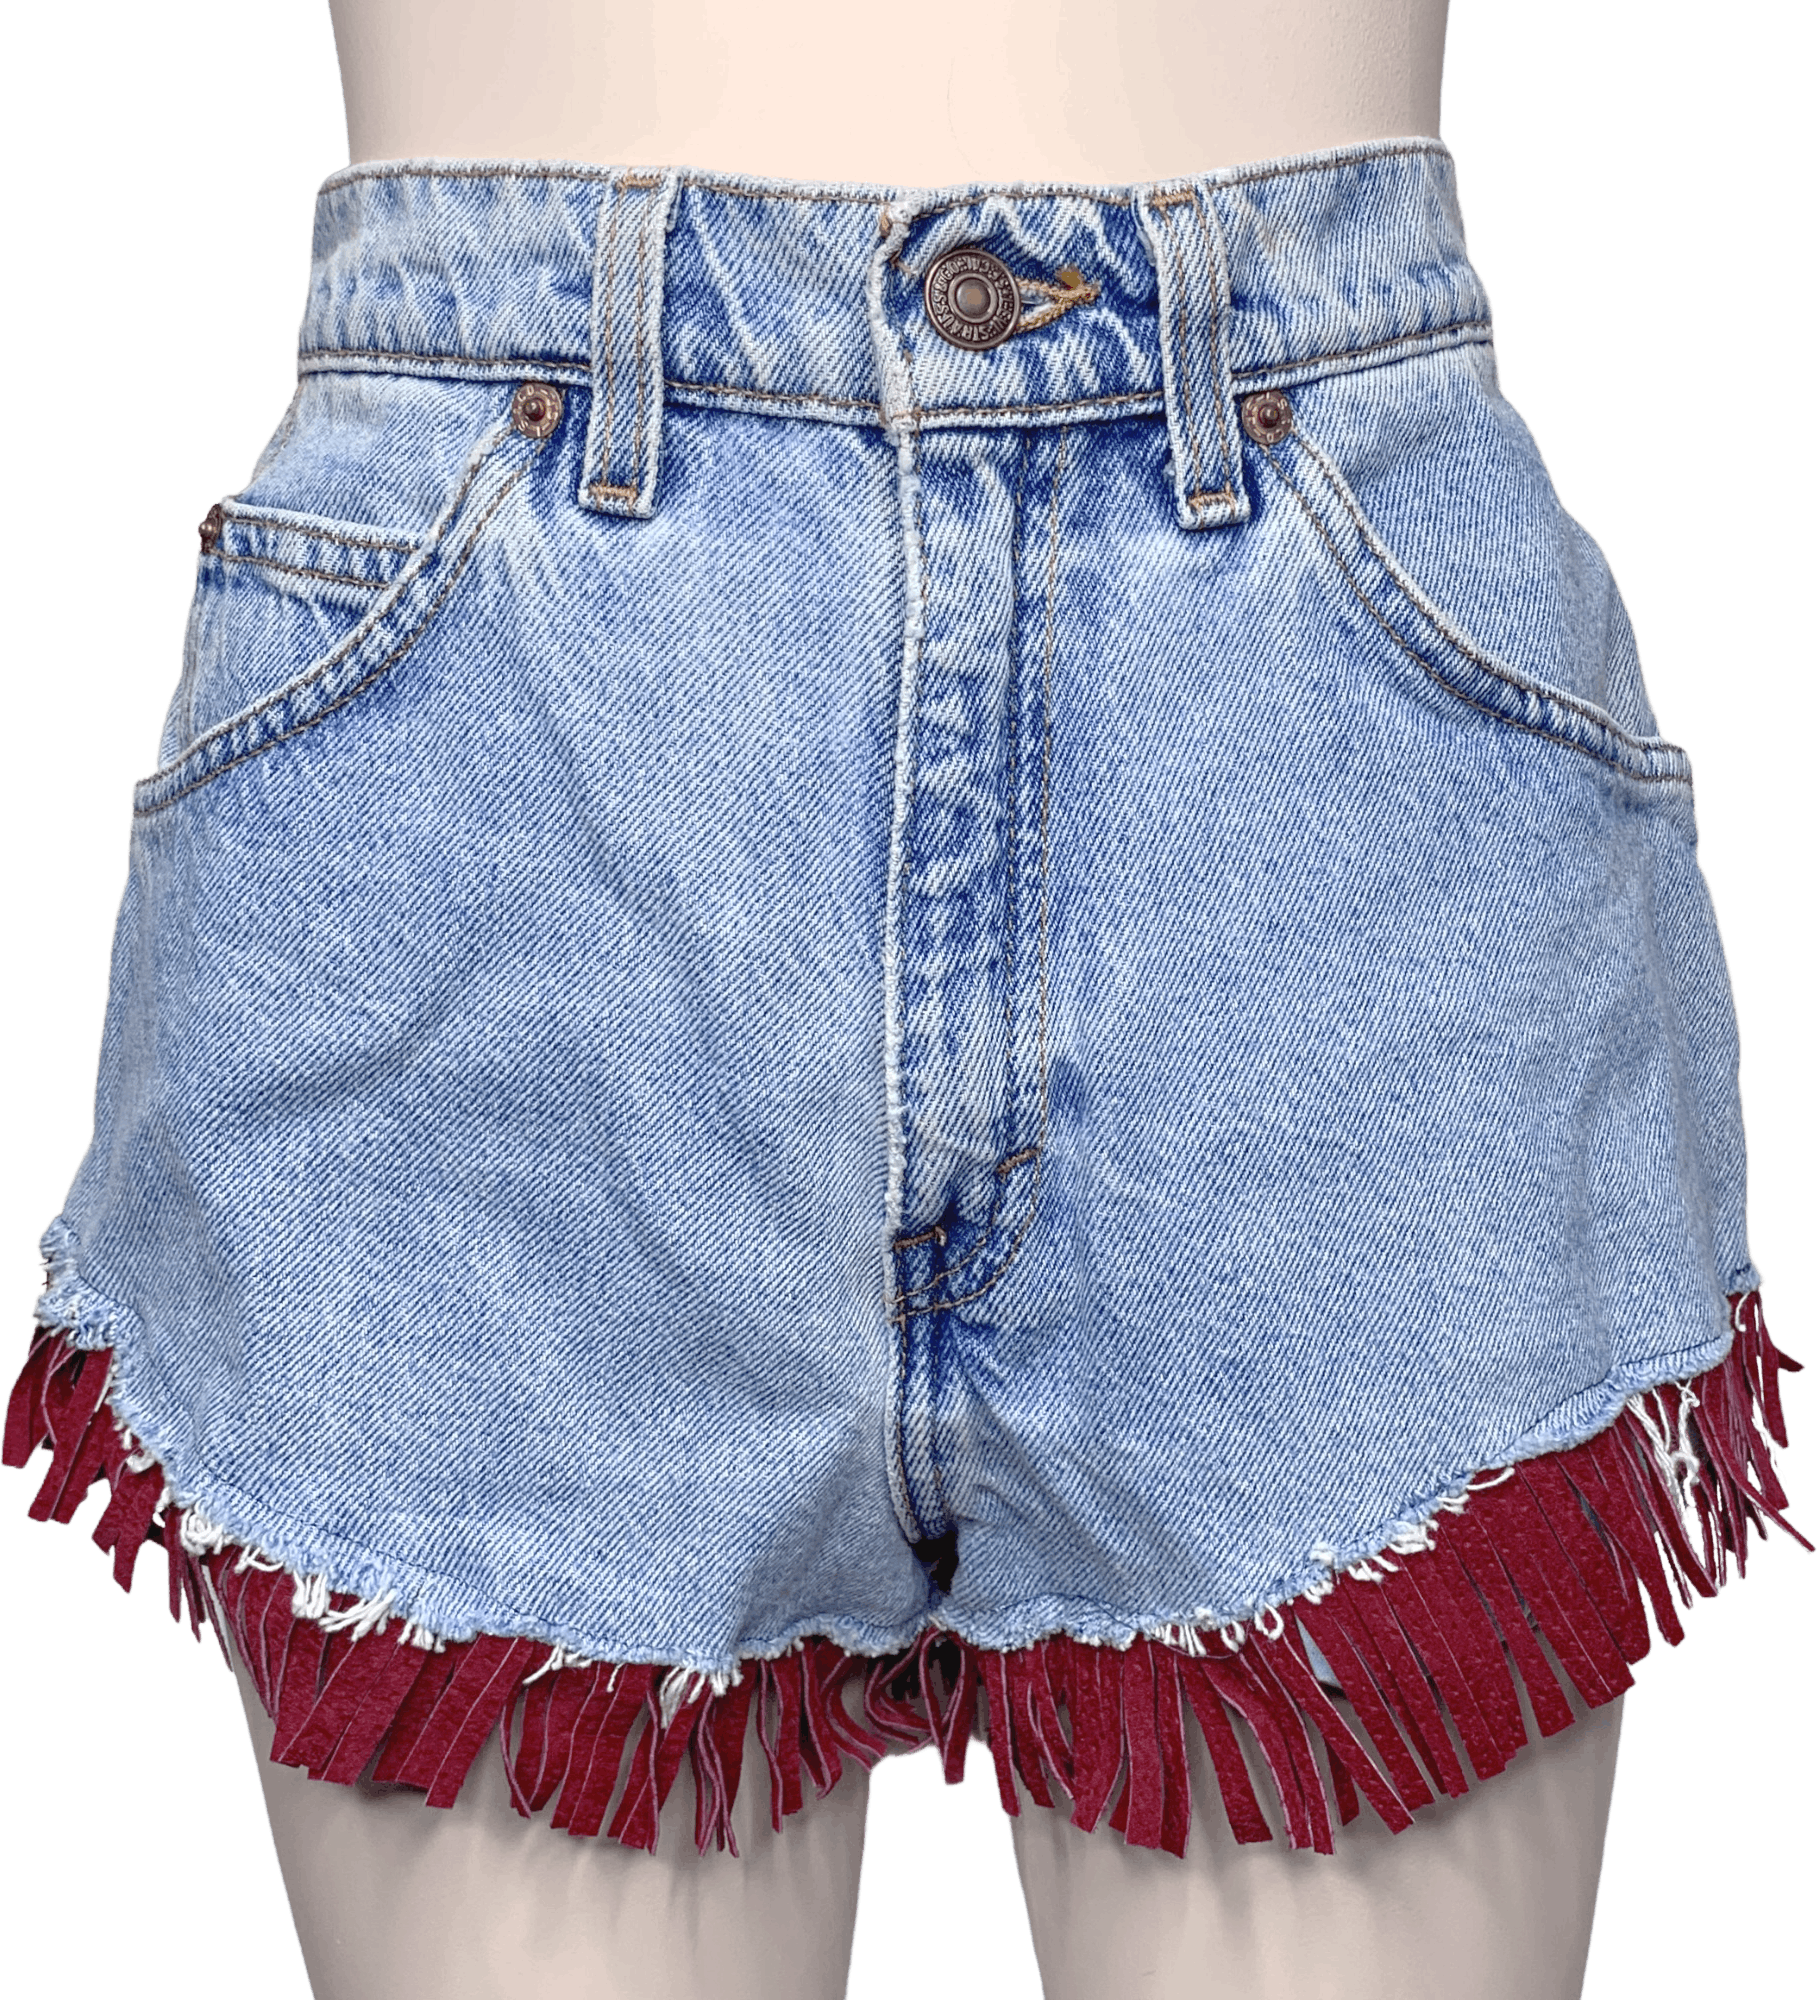 Vintage 80s90s Levis 954 Cut Off High Waist Mom Jeans Shorts By Levis Shop Thrilling 1840